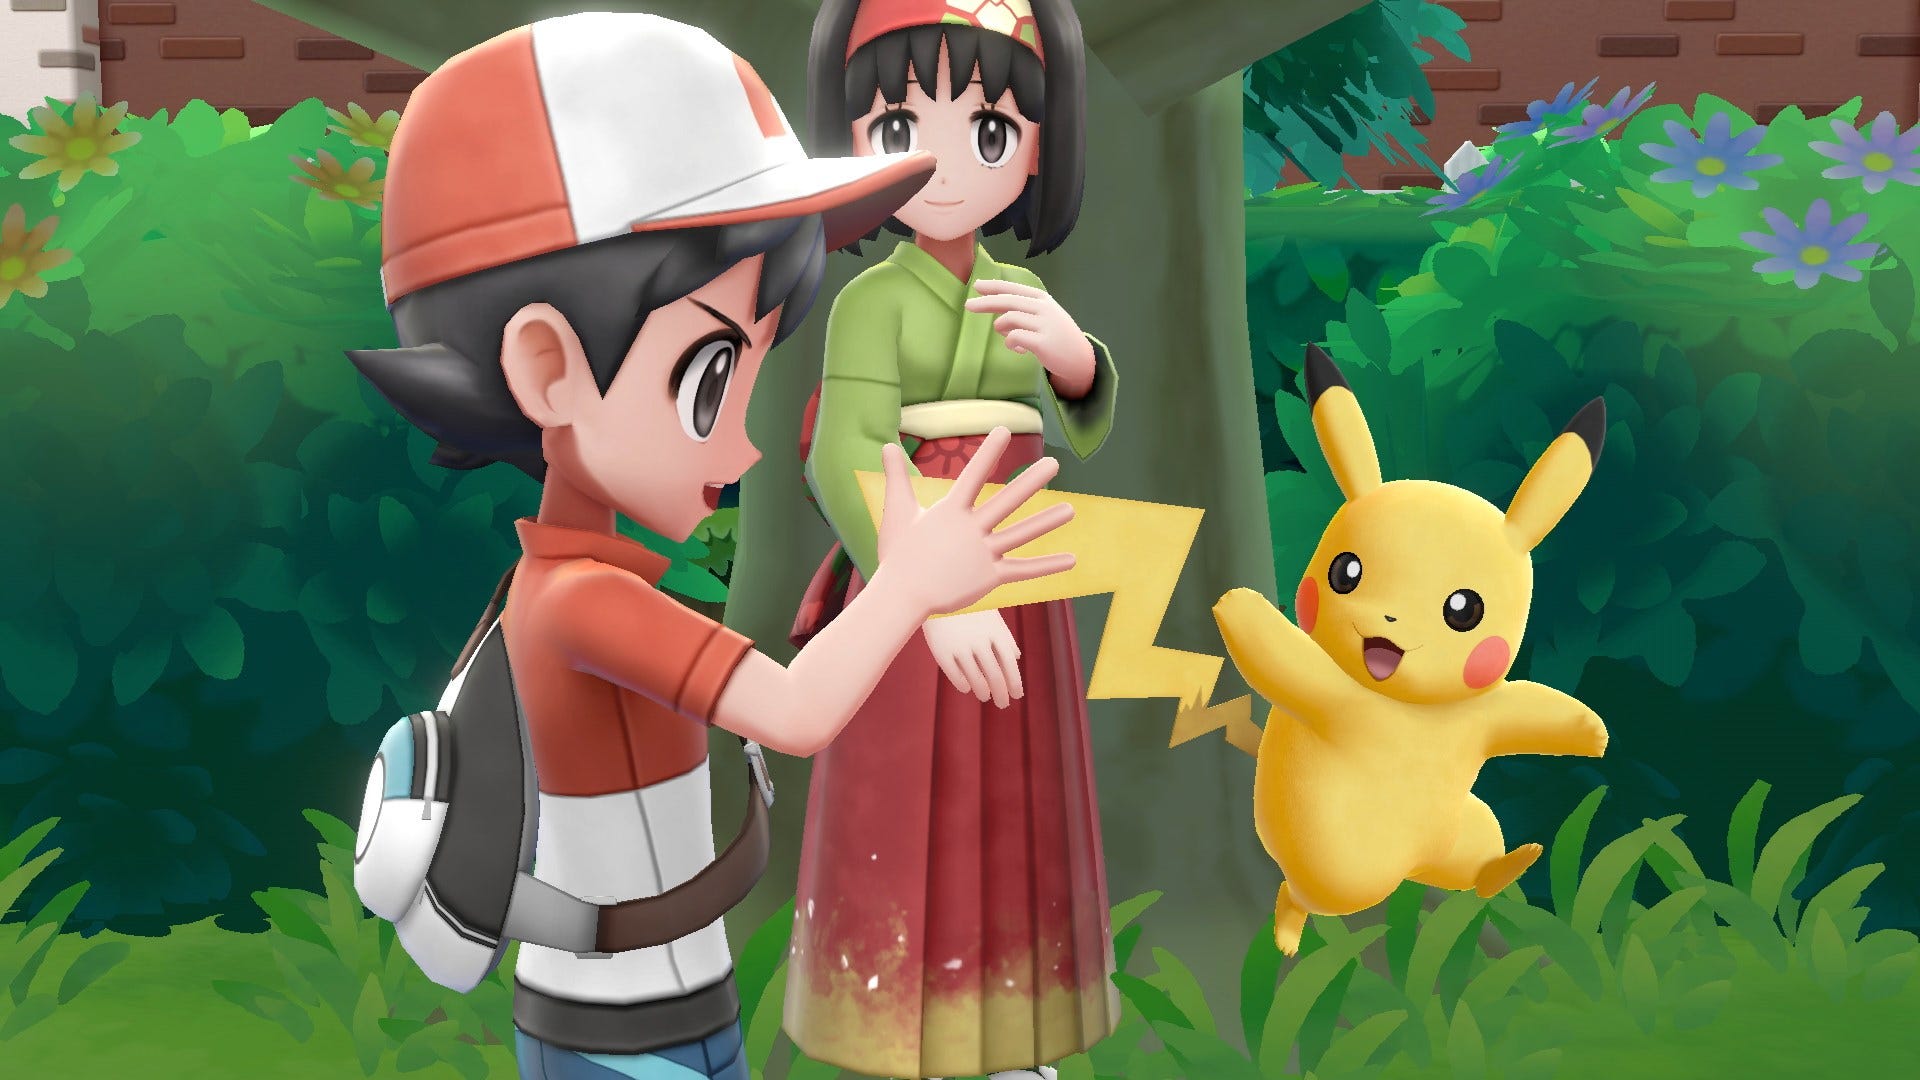 Go Time On Switch Pokemon Let S Go Pikachu Evee Review Technobubble